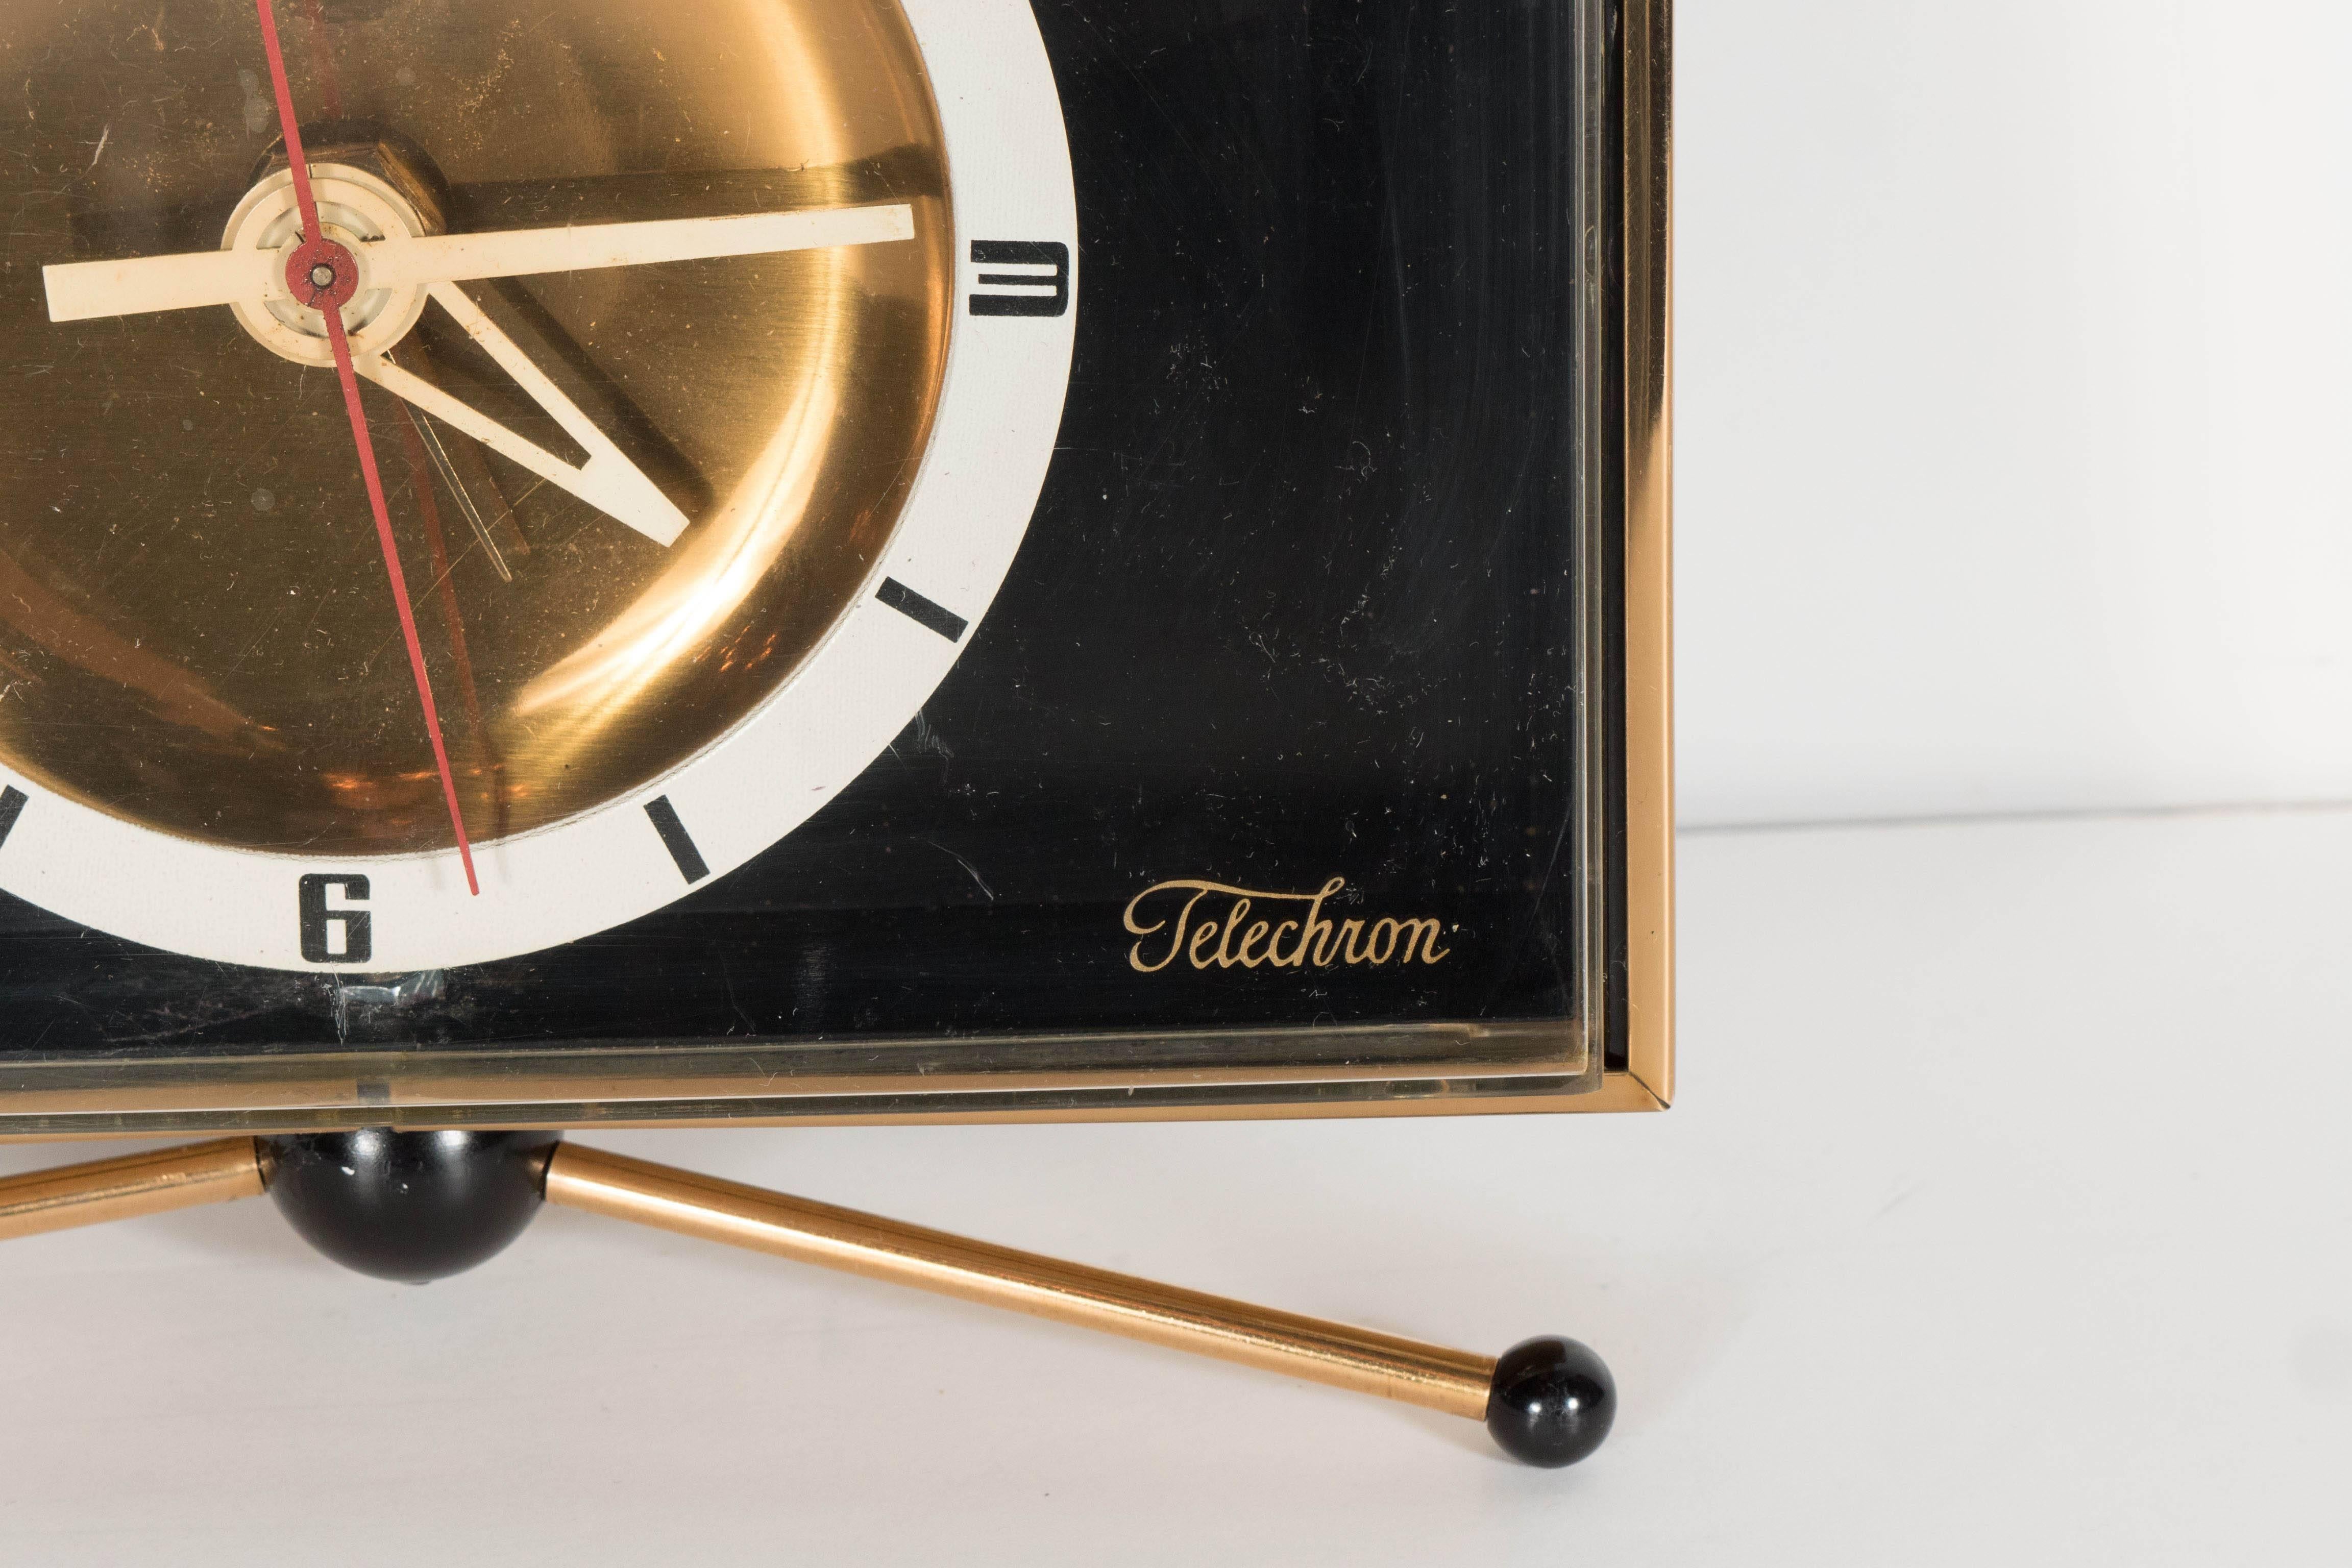 A Classic example of Mid-Century Modernism's clean aesthetic and style. A brass tripod with ball-points holds a fully original Telechron clock resting within a rectangular polished-brass frame. A striking brass dial is surrounded by a red second